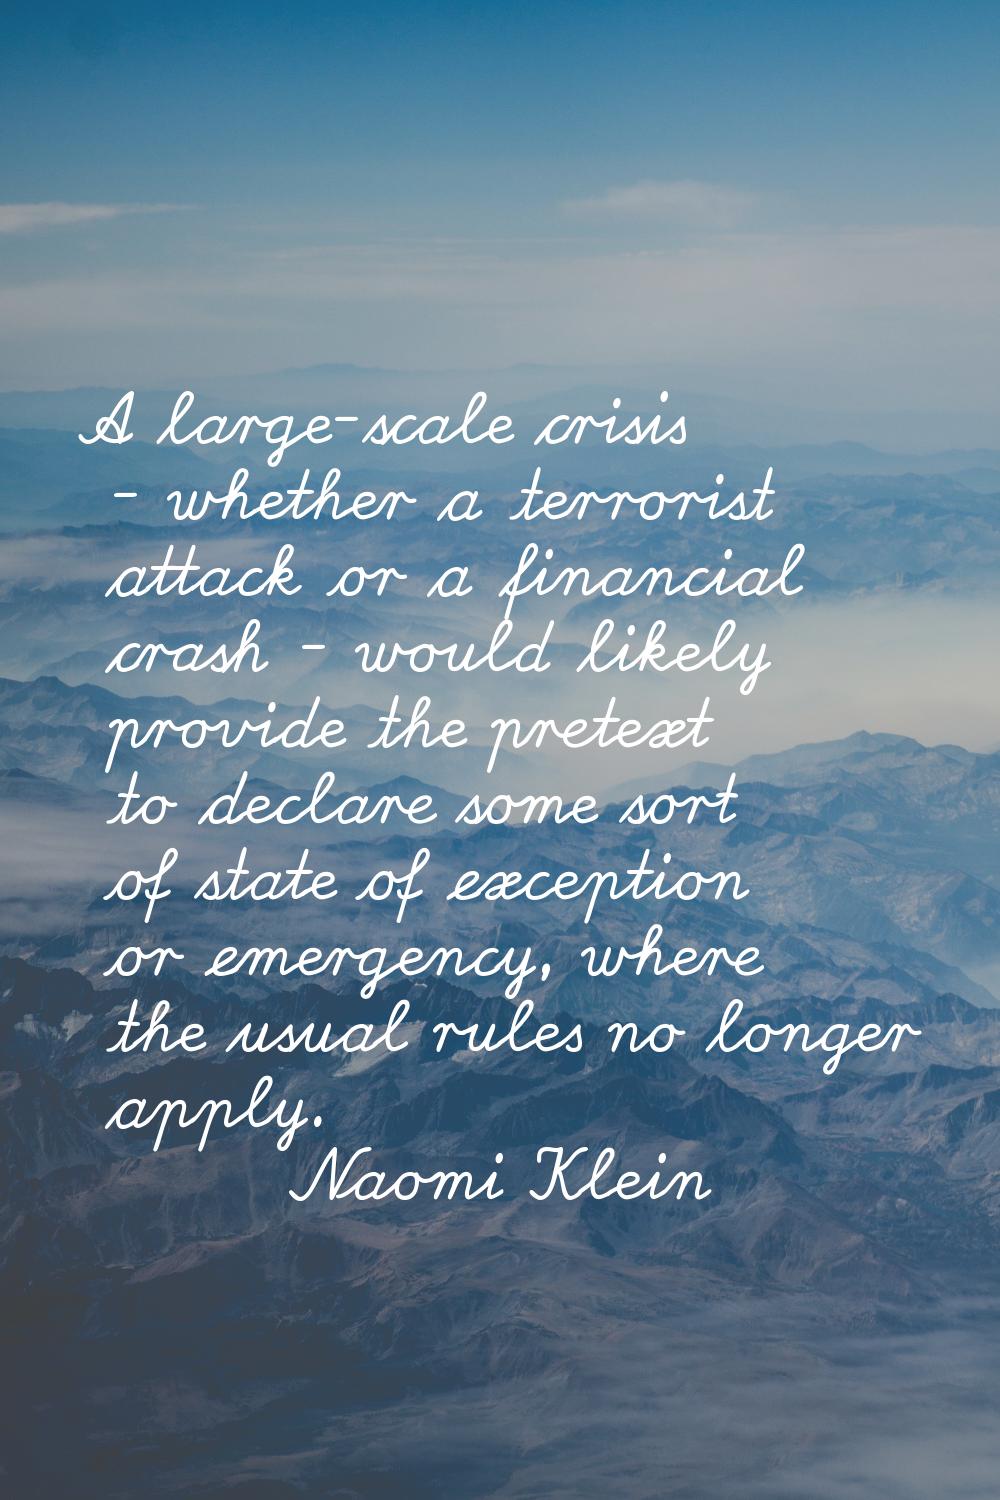 A large-scale crisis - whether a terrorist attack or a financial crash - would likely provide the p